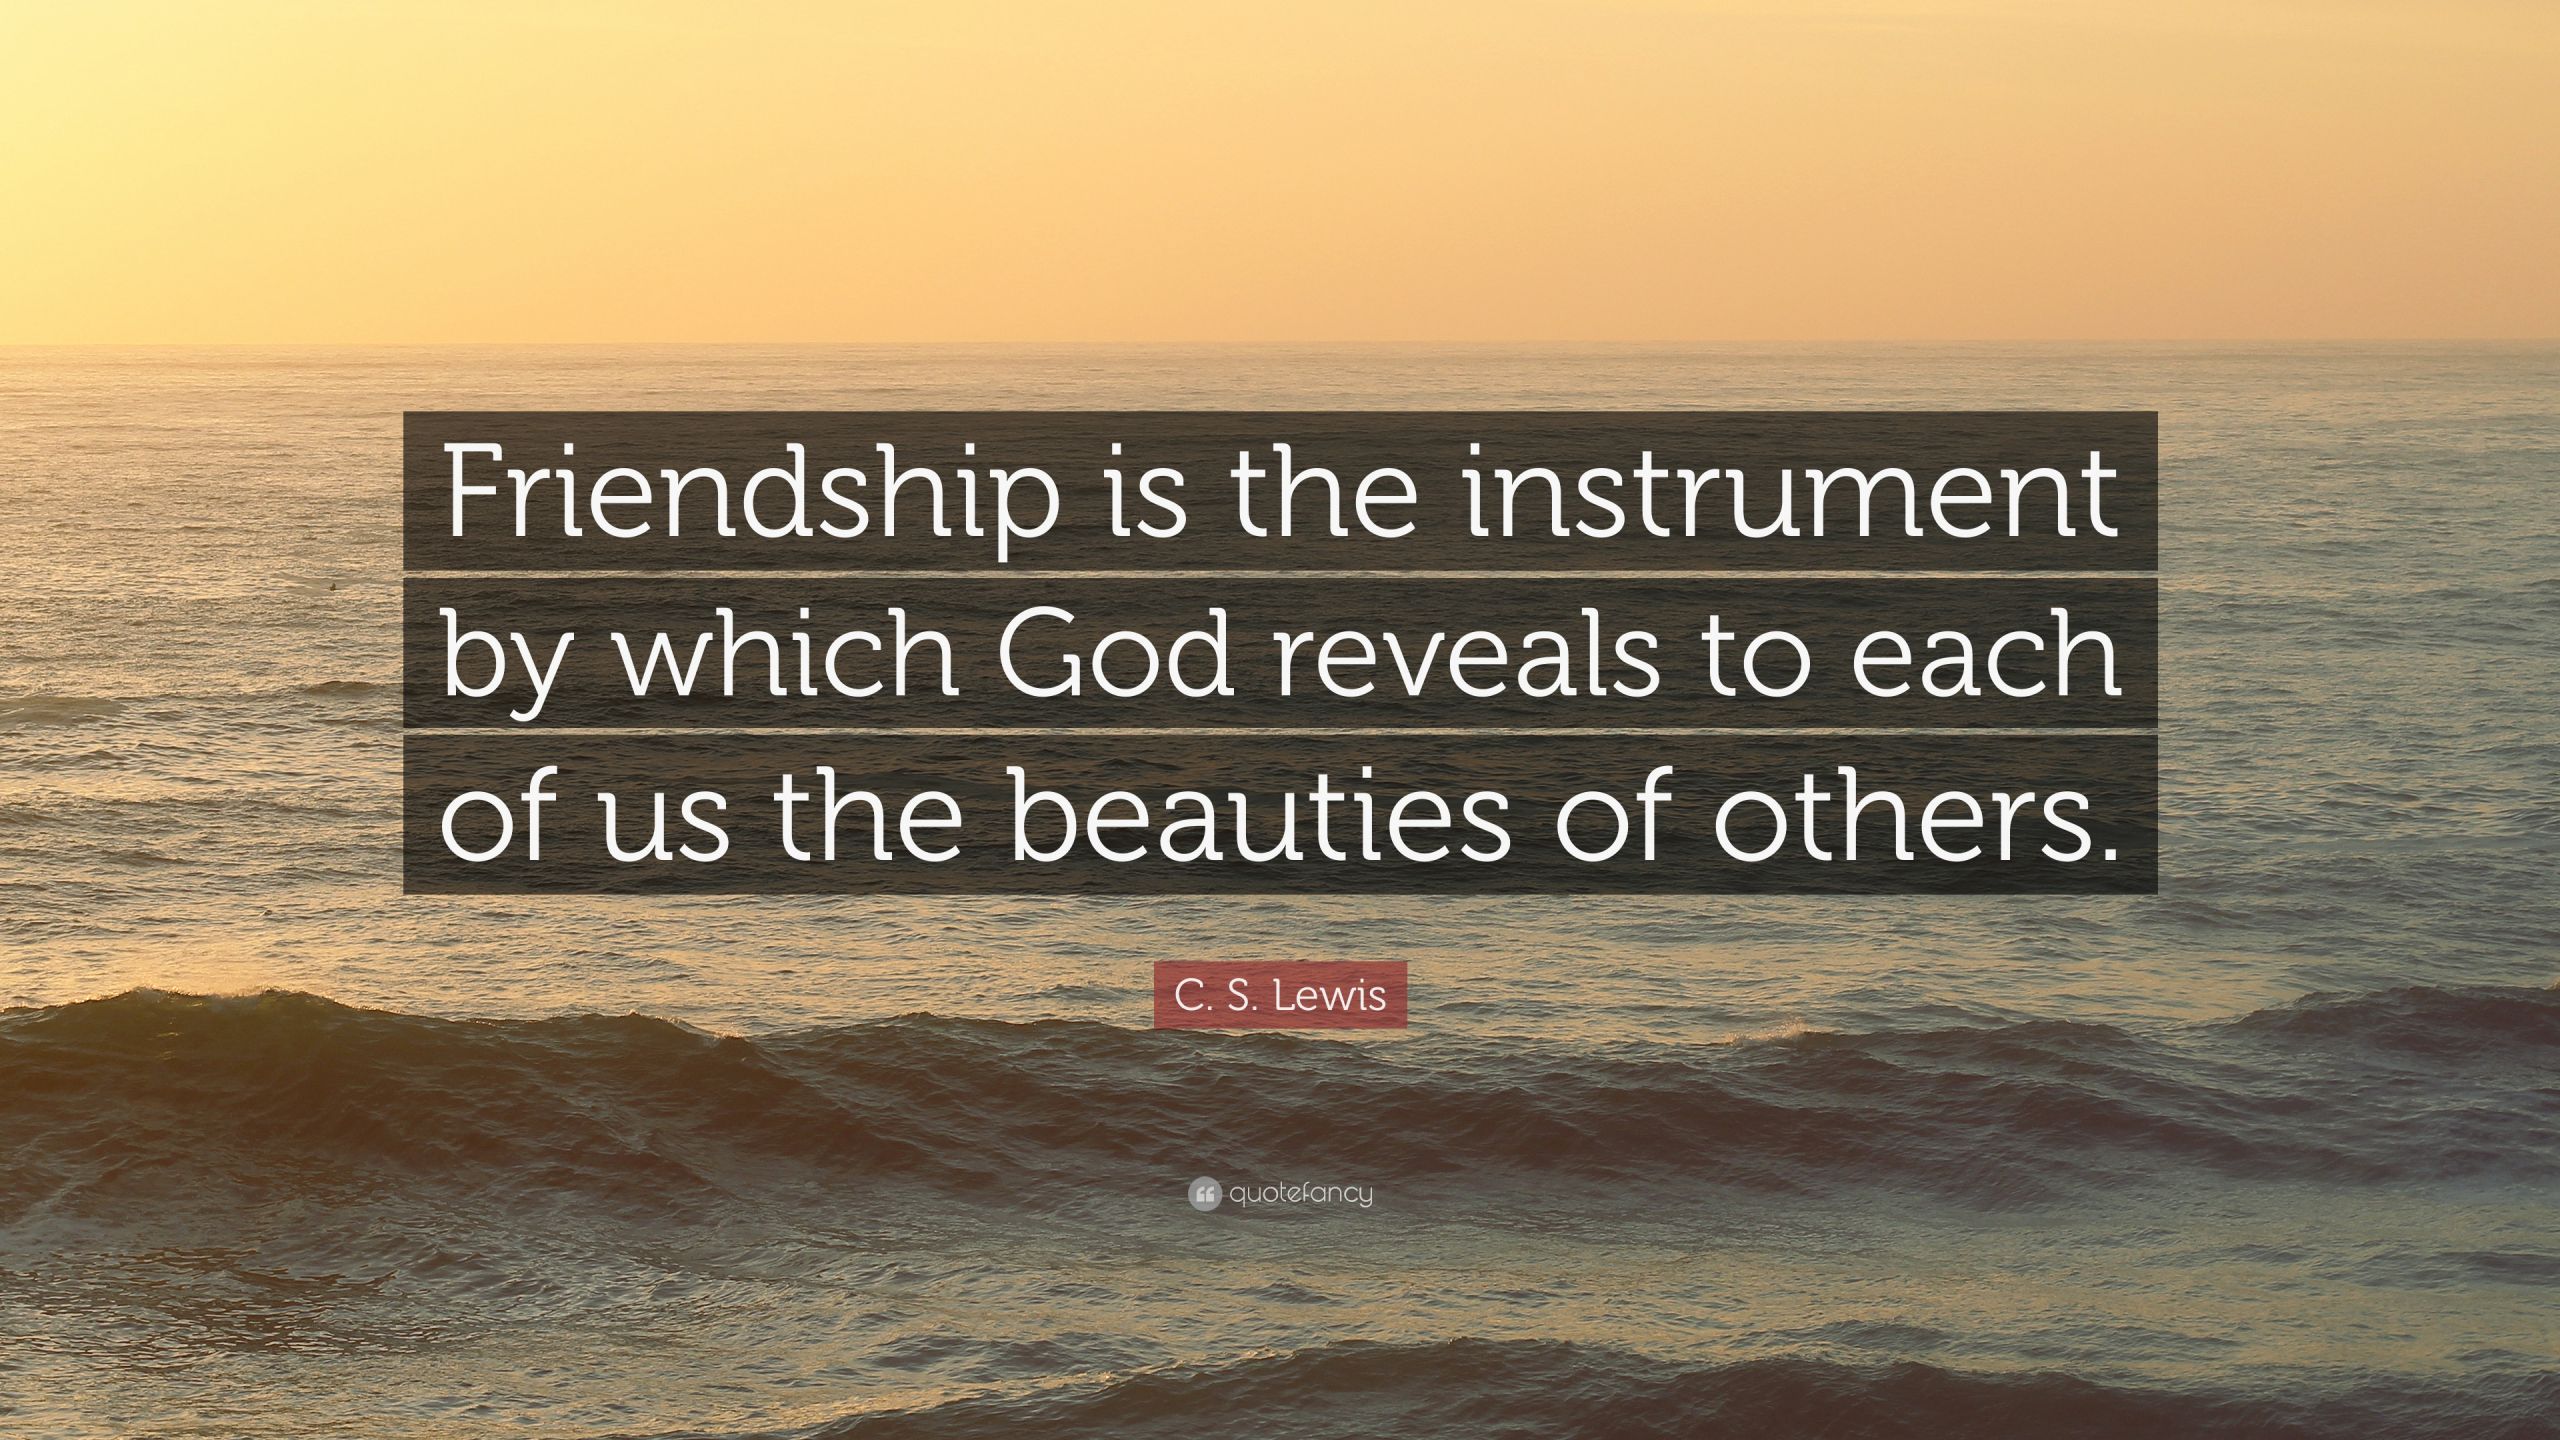 C.S.Lewis Quotes On Friendship
 C S Lewis Quote “Friendship is the instrument by which